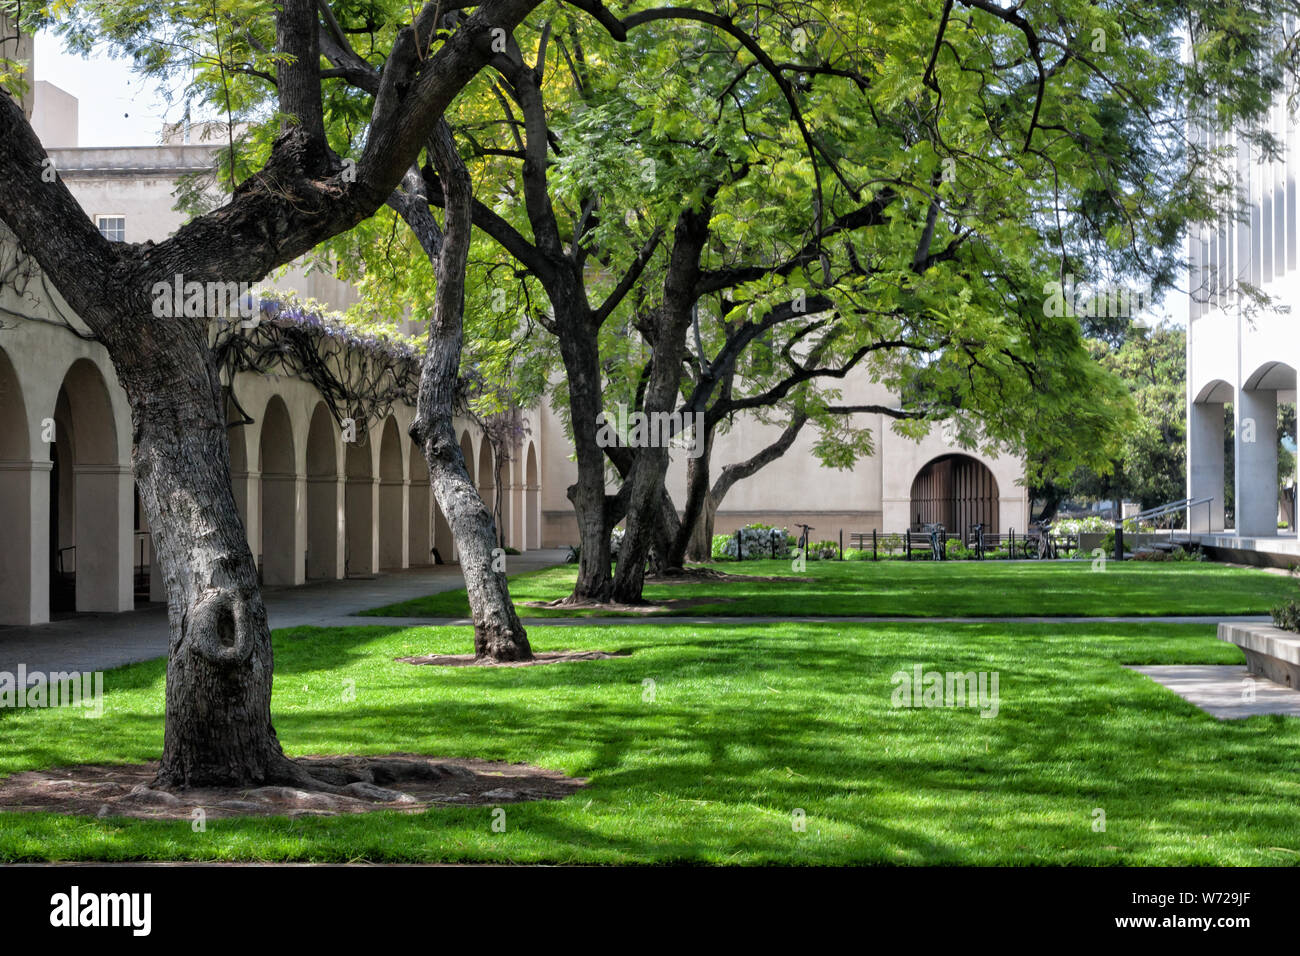 PASADENA, CA/USA - March 13: The campus of the California Institute of Technology.  Caltech is a research university in Pasadena, CA and home to 32 No Stock Photo